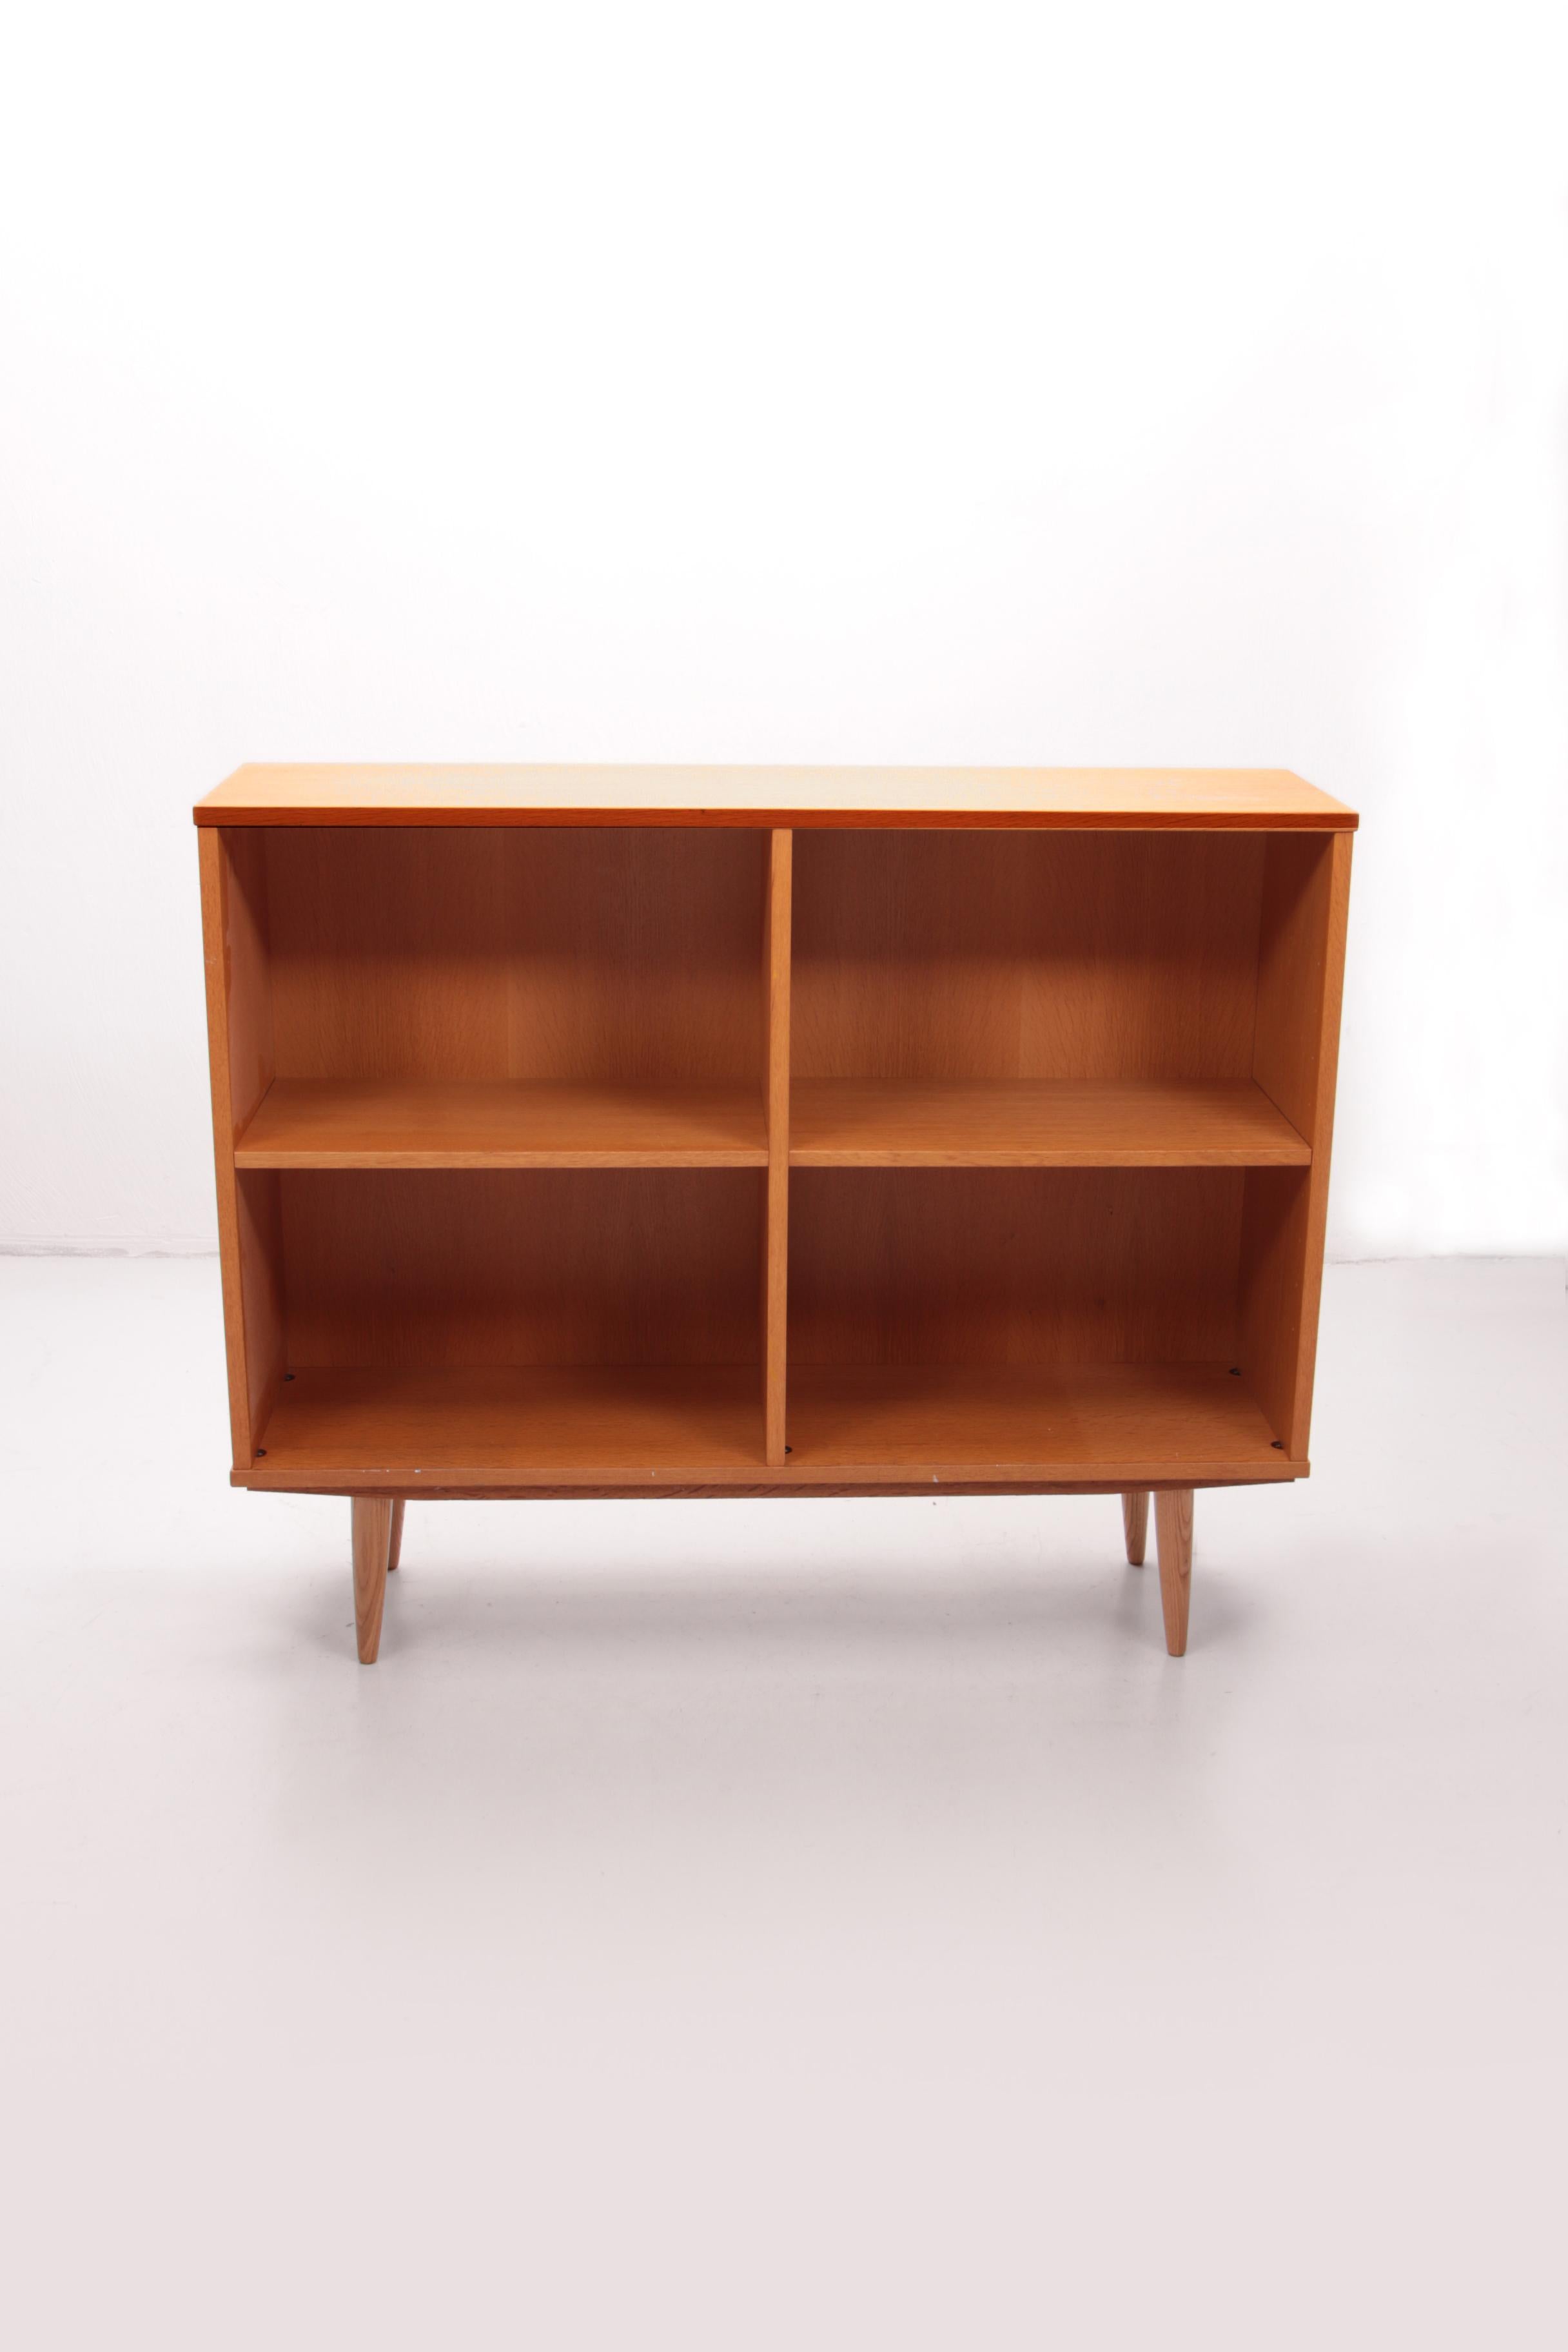 Danish design bookcase made by Poul Hundevad, 1960, Denmark.


This sturdy and solid bookcase from the Hundevad brand is in very beautiful condition. This stylish sideboard and bookcase made of light oak veneer was designed in the 1960s by Carlo